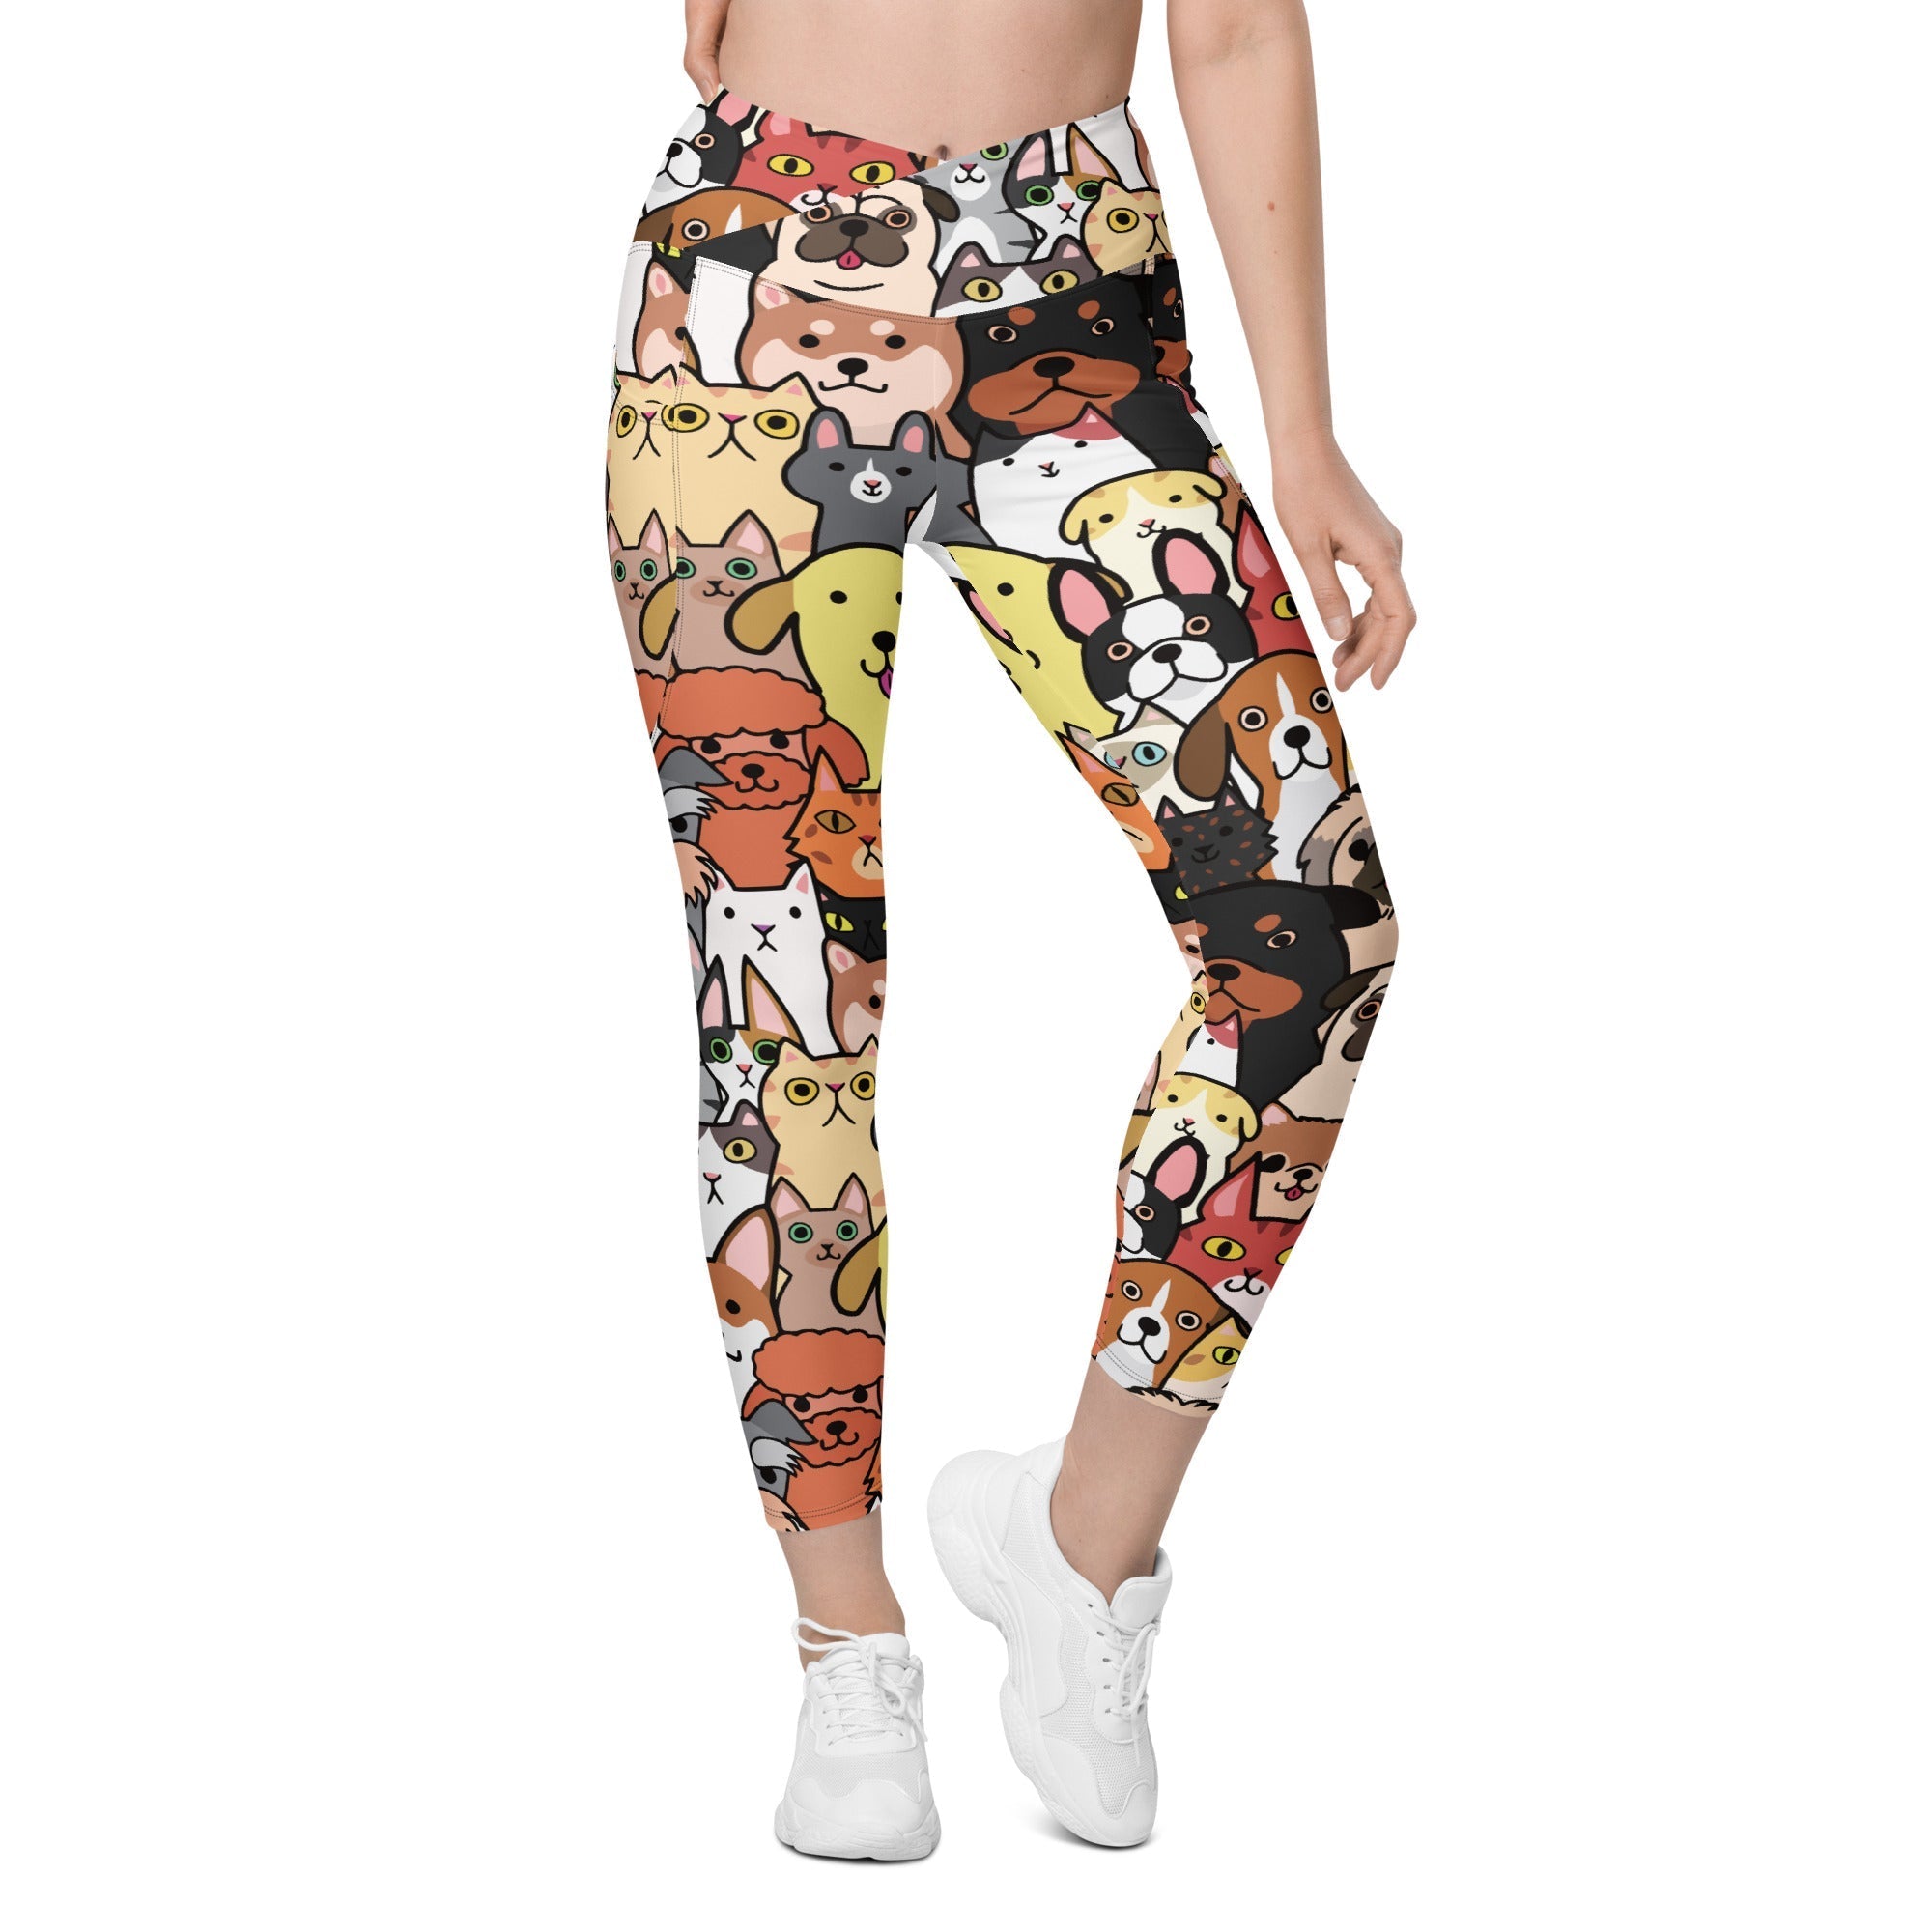 Crossover leggings with pockets – mitomill